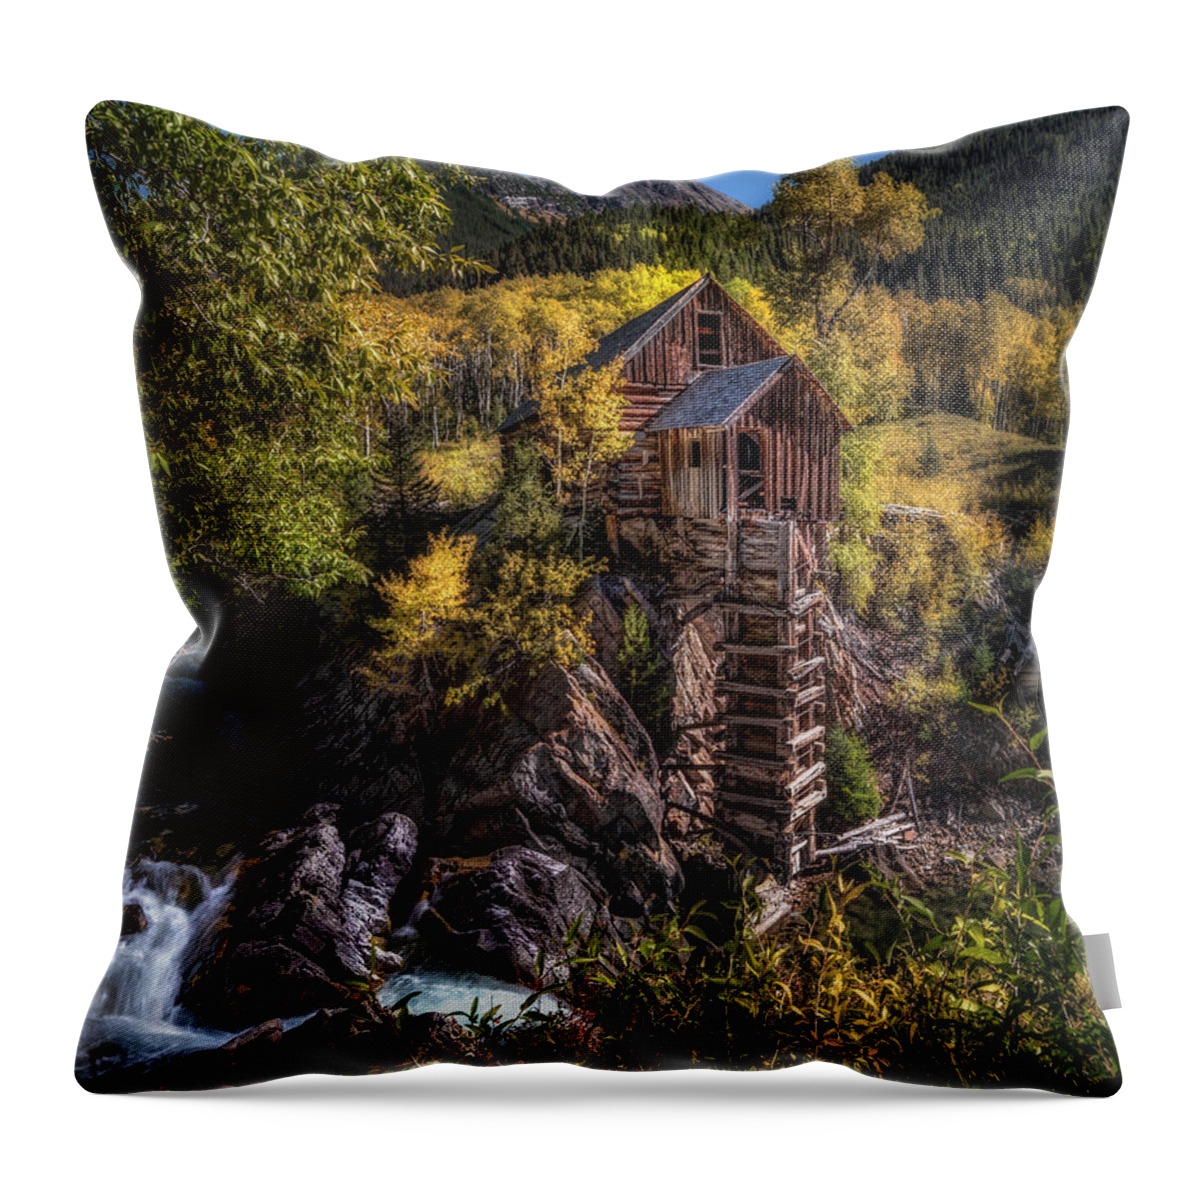 Crystal Mill Throw Pillow featuring the photograph Crystal Mill Colorado by Michael Ash